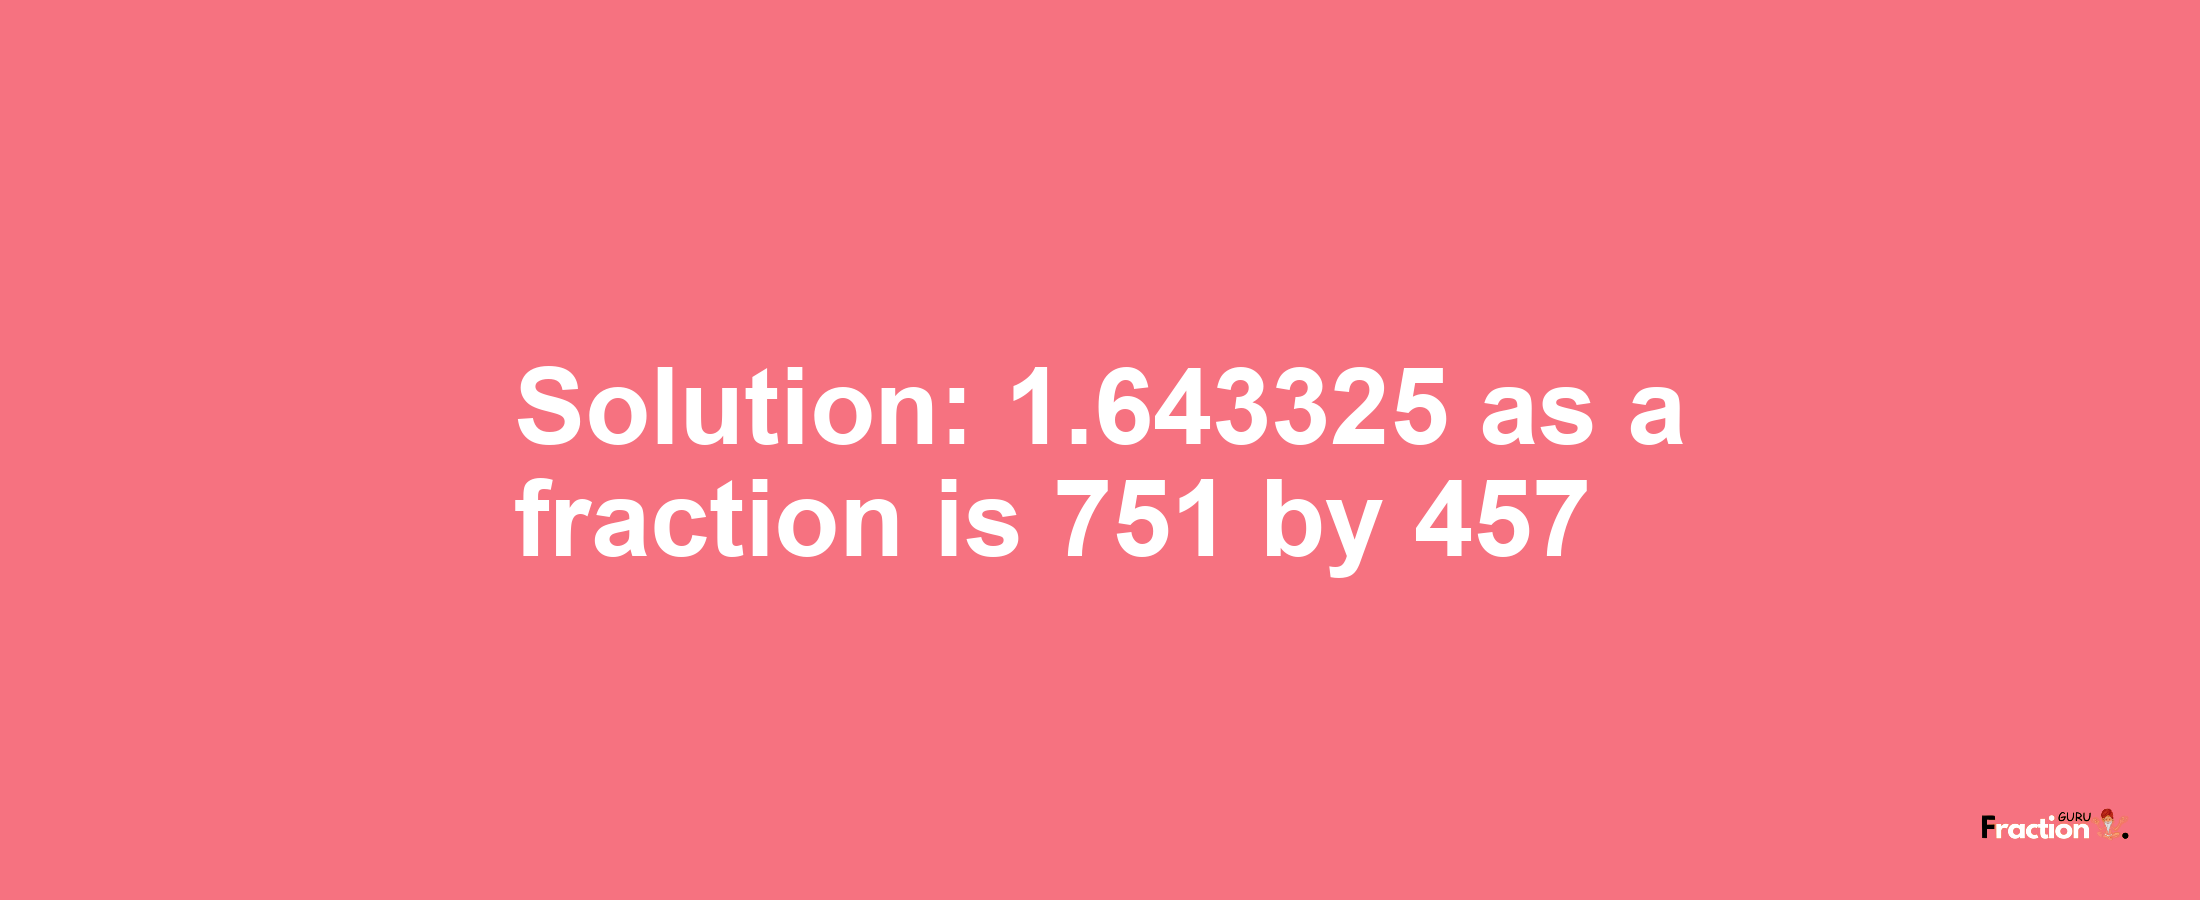 Solution:1.643325 as a fraction is 751/457